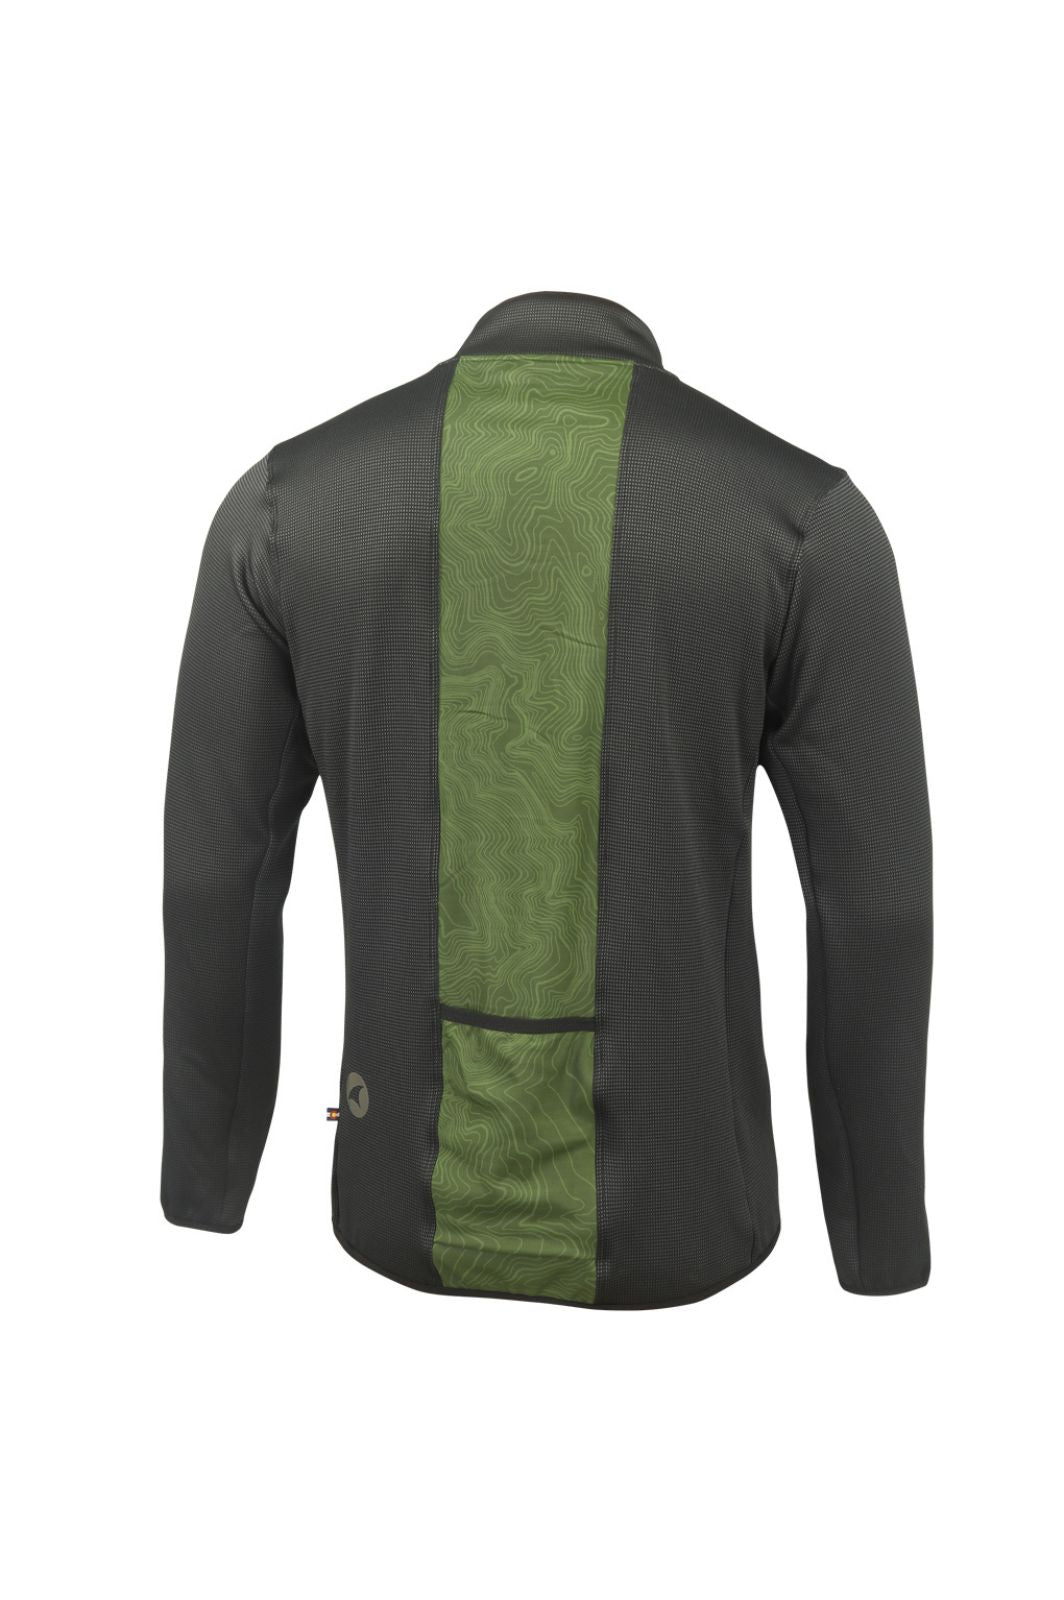 Men's Moss Green Cycling Track Jacket - Back View